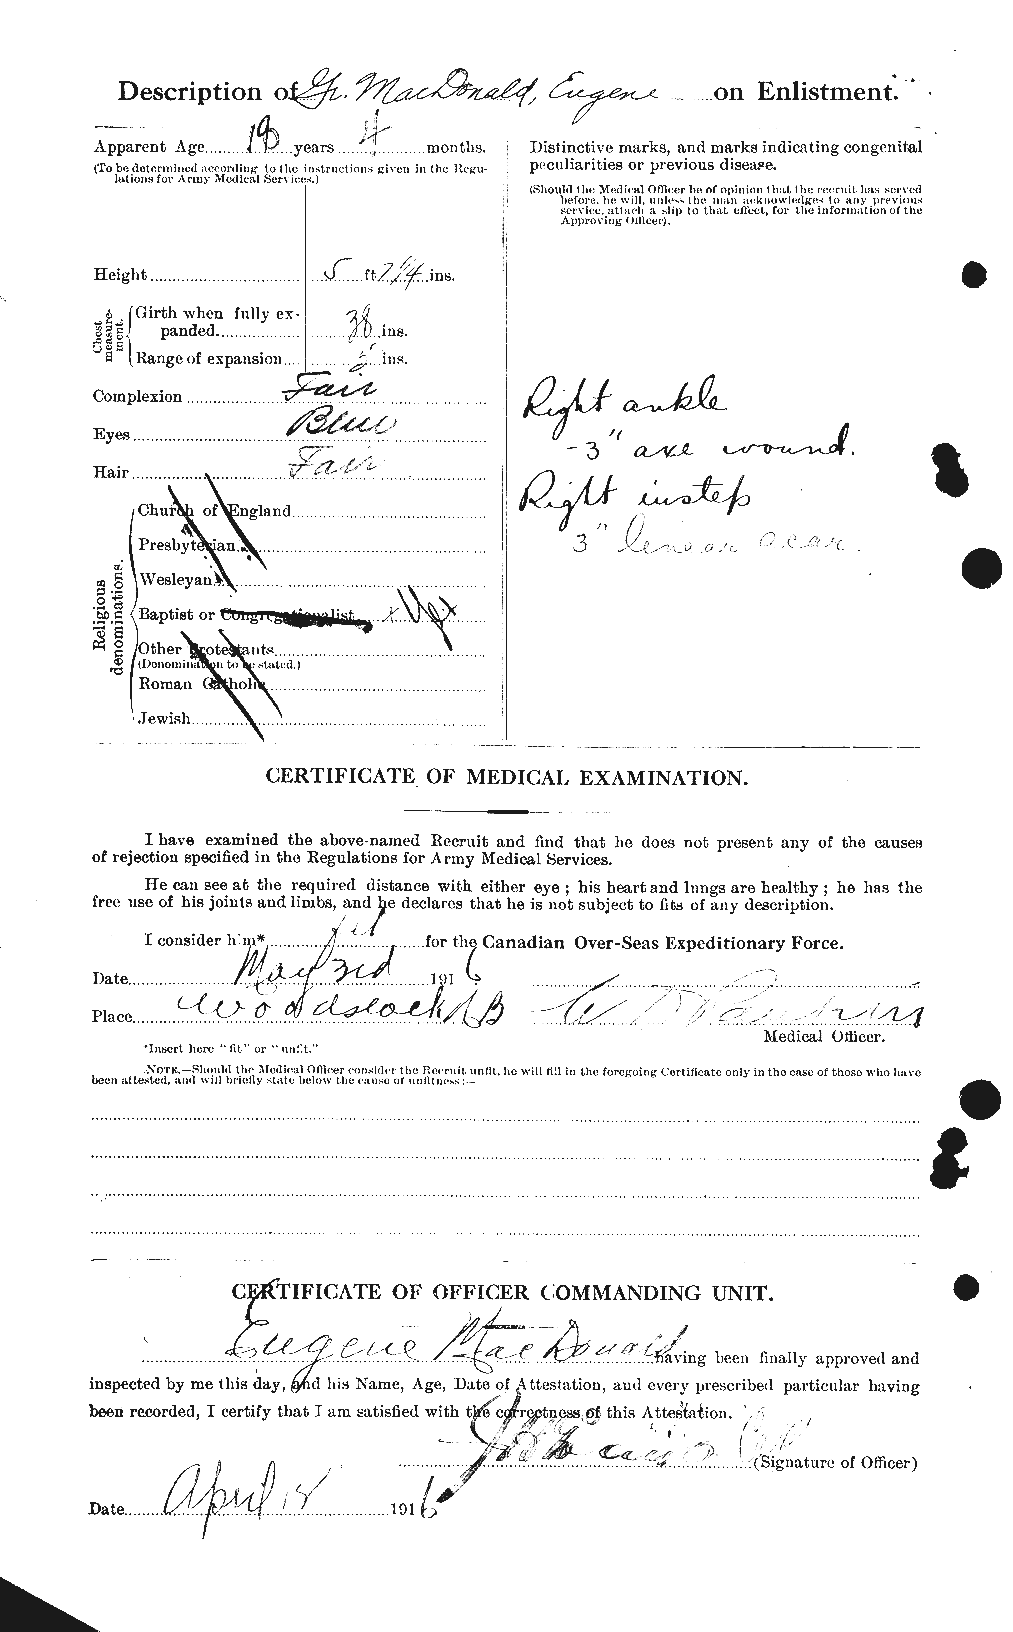 Personnel Records of the First World War - CEF 517379b